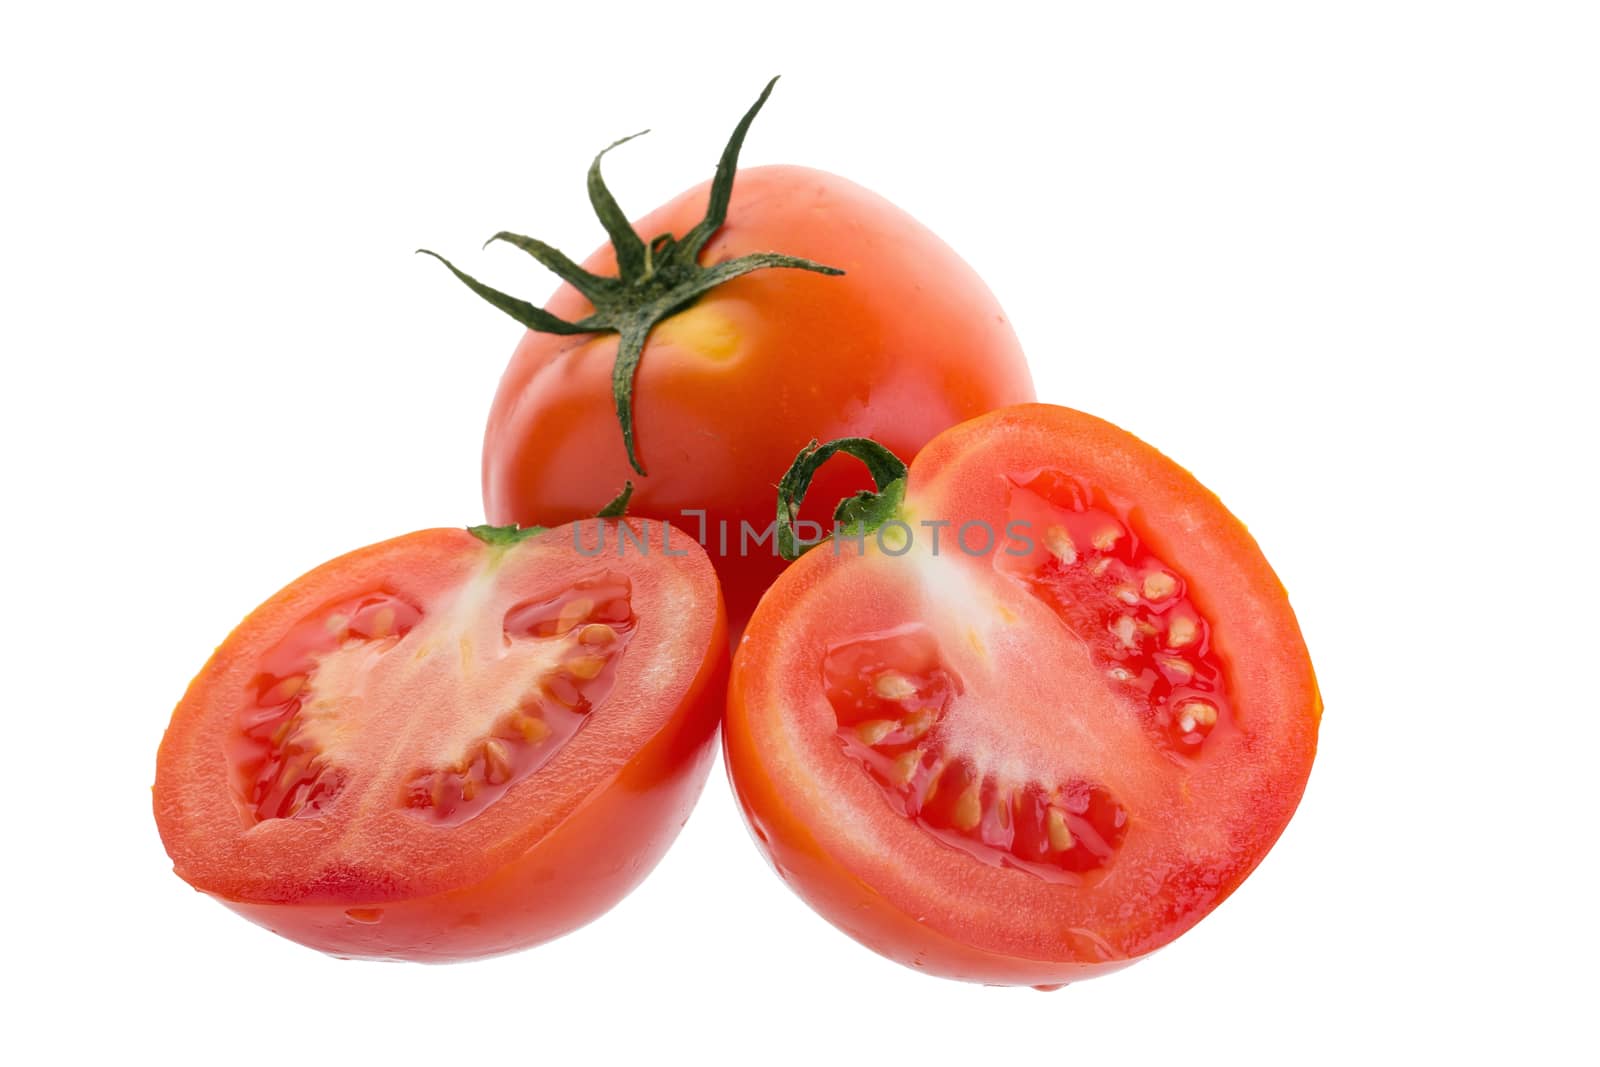 Slice of tomato isolated on a white background by kaiskynet